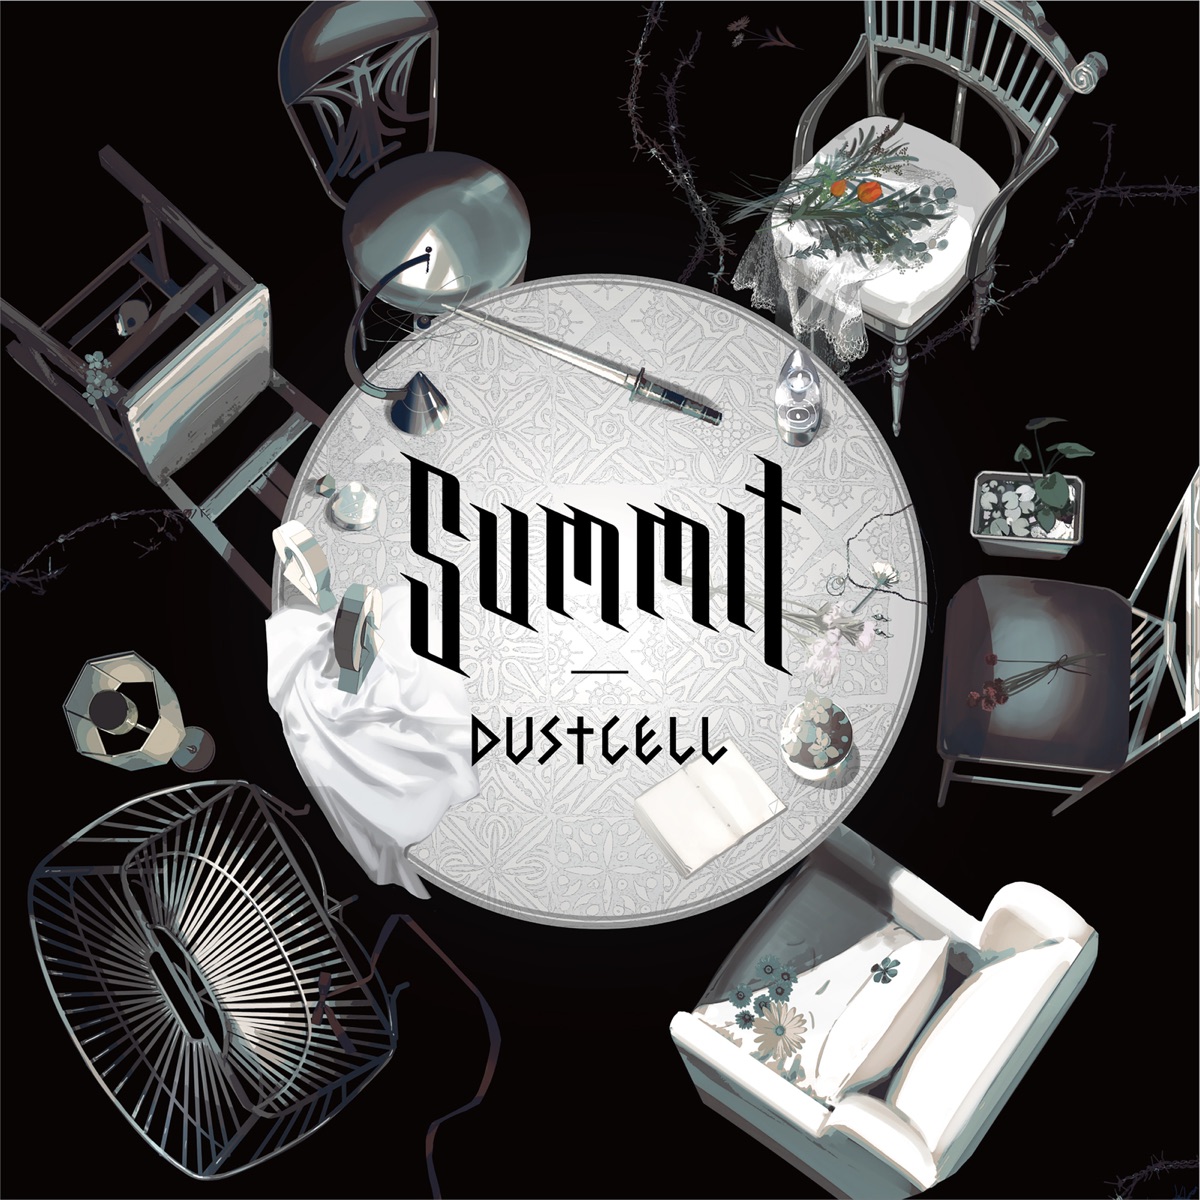 Cover art for『DUSTCELL - SOIREE』from the release『SUMMIT』